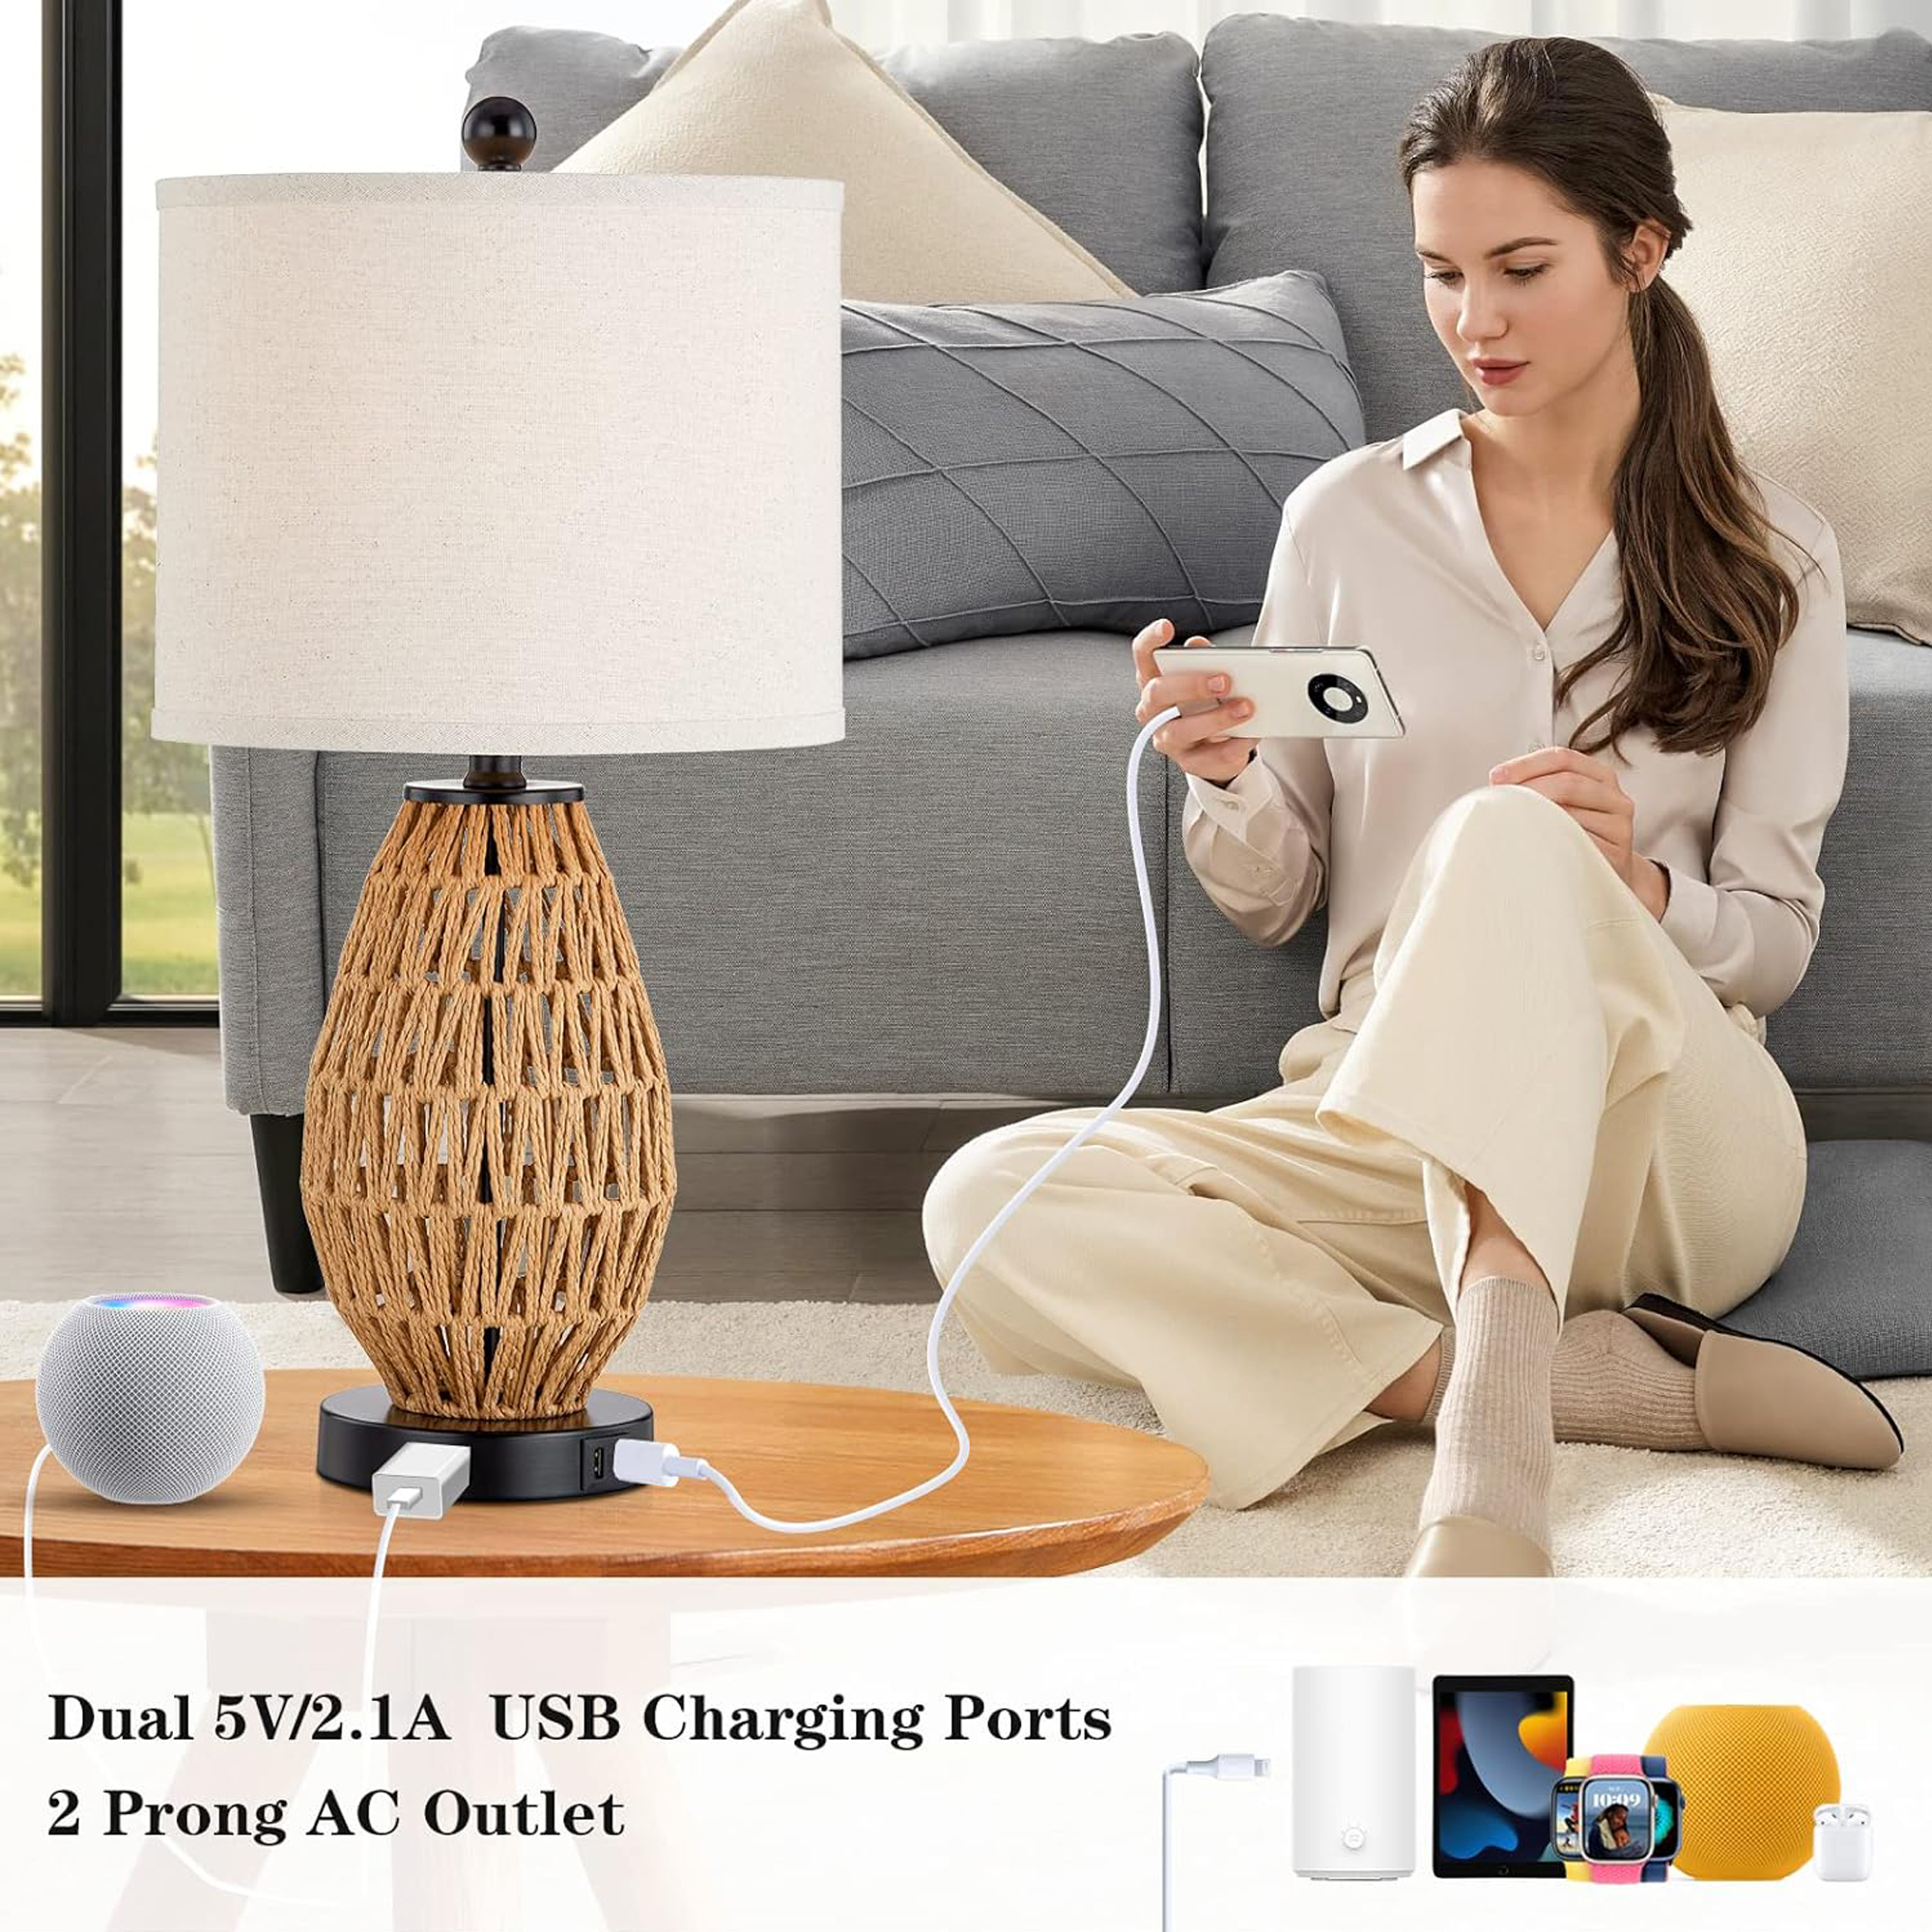 Cinkeda Rattan Table Lamps Set of 2 with USB Ports AC Outlet Bohemian 3 Way Dimmable Touch Control Nightstand Lamp for Living Room Bedroom(2 Bulb) - image 4 of 8